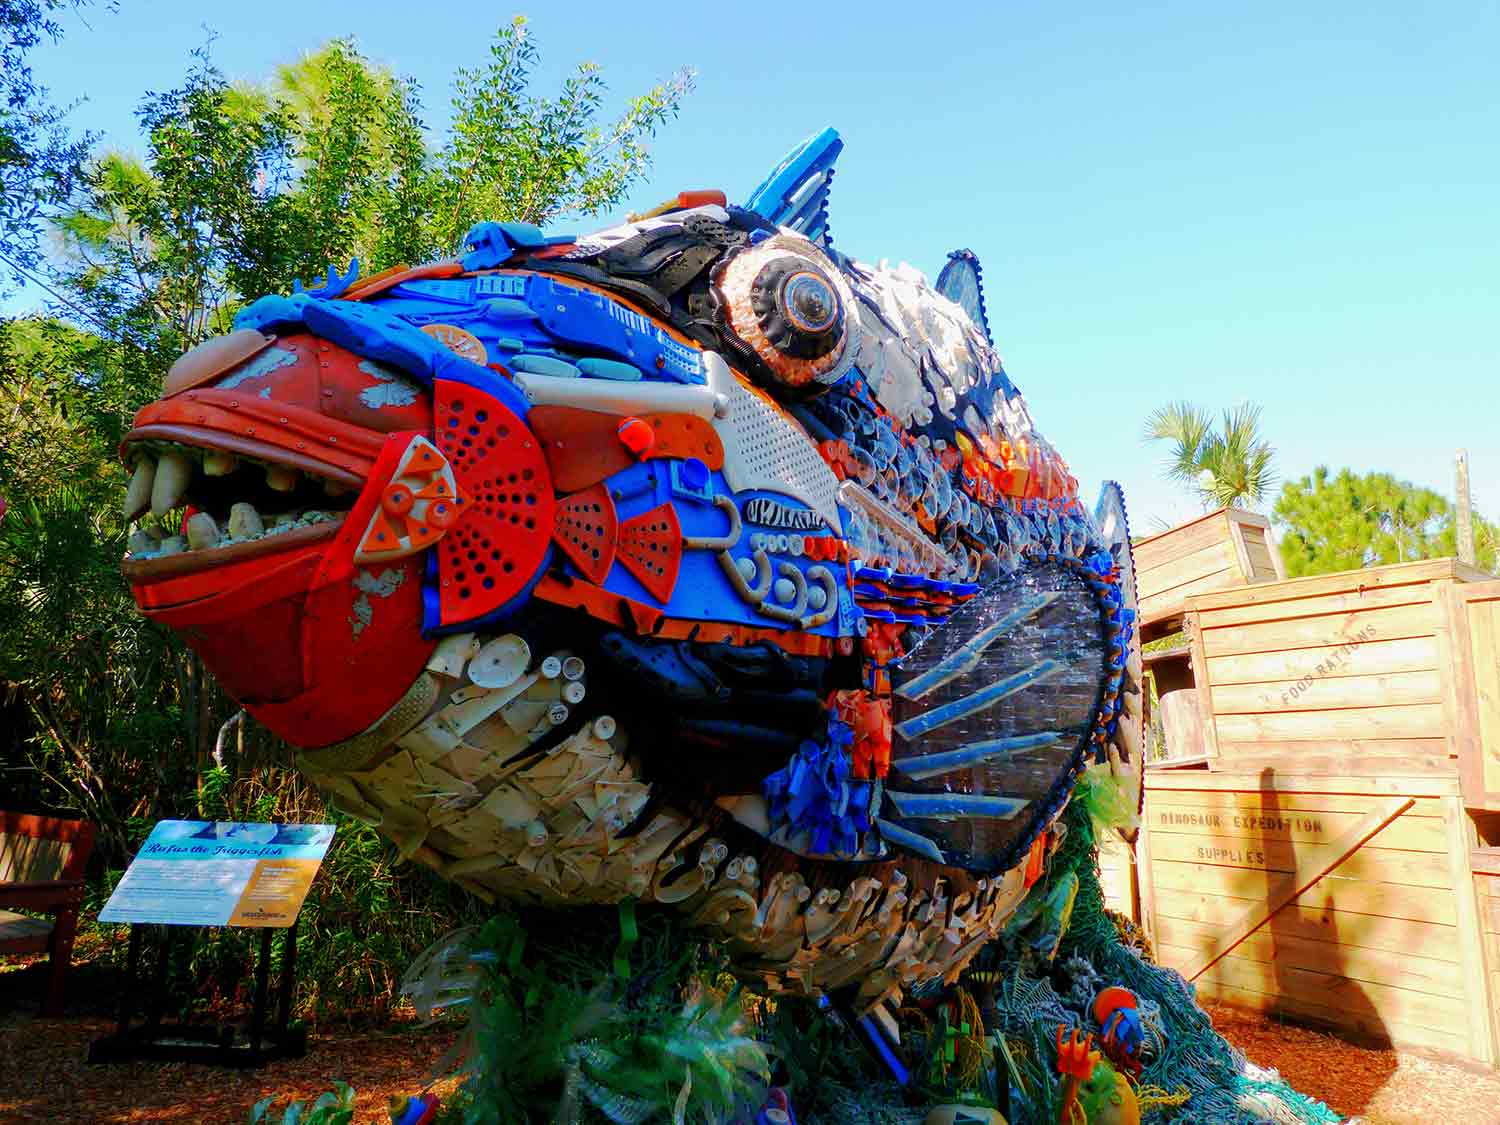 A large multicolored sculpture of a fish made from plastic